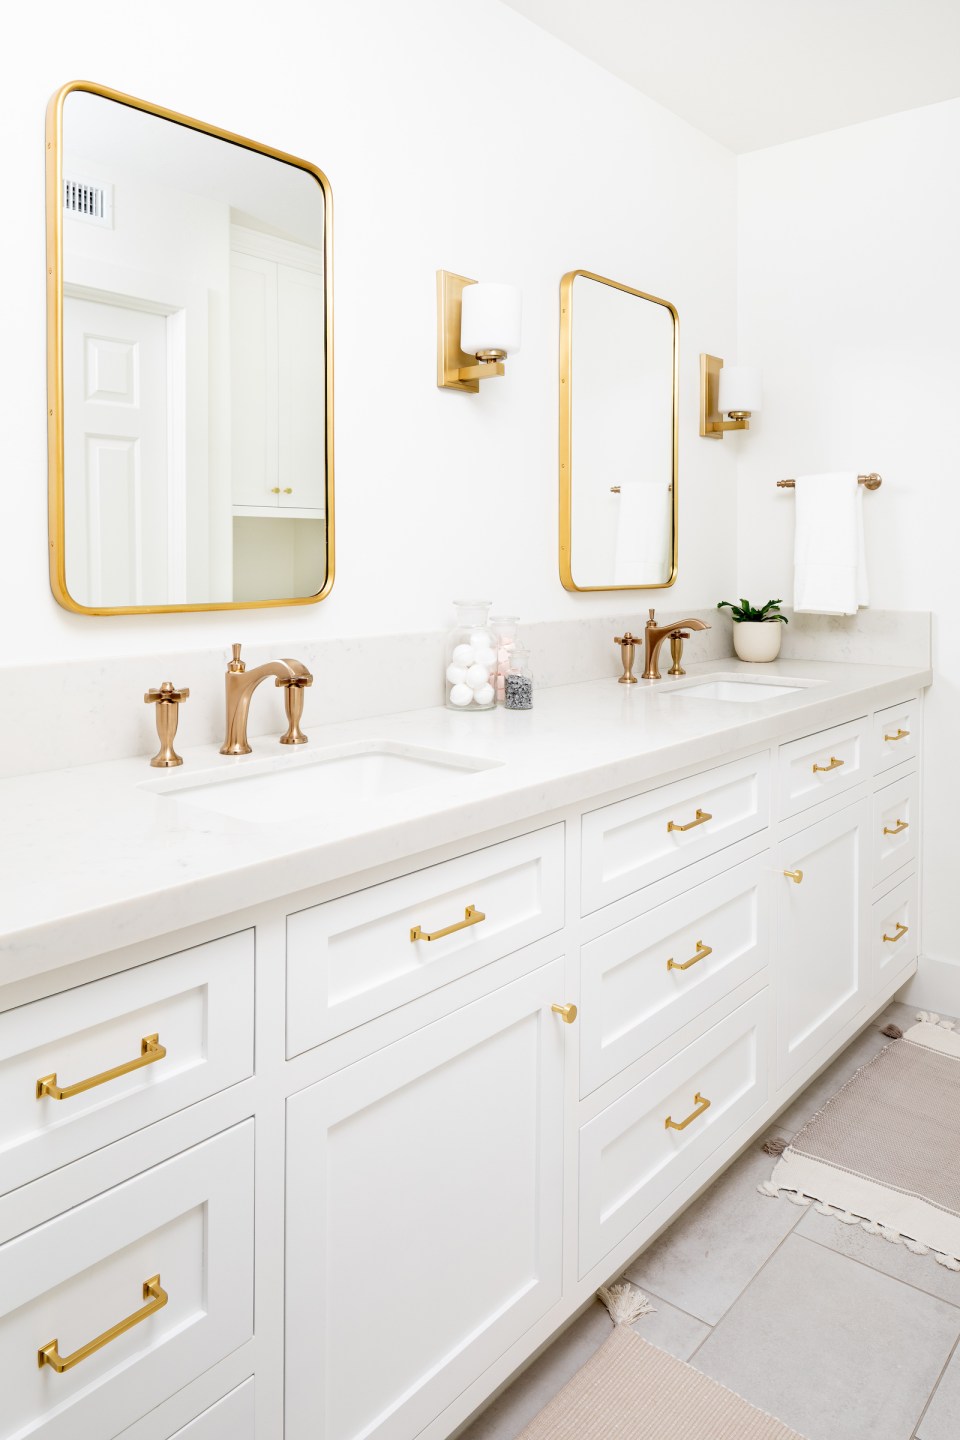 Bright white cabinets and countertops are accented by brass faucets, fixtures, sconces, and mirrors